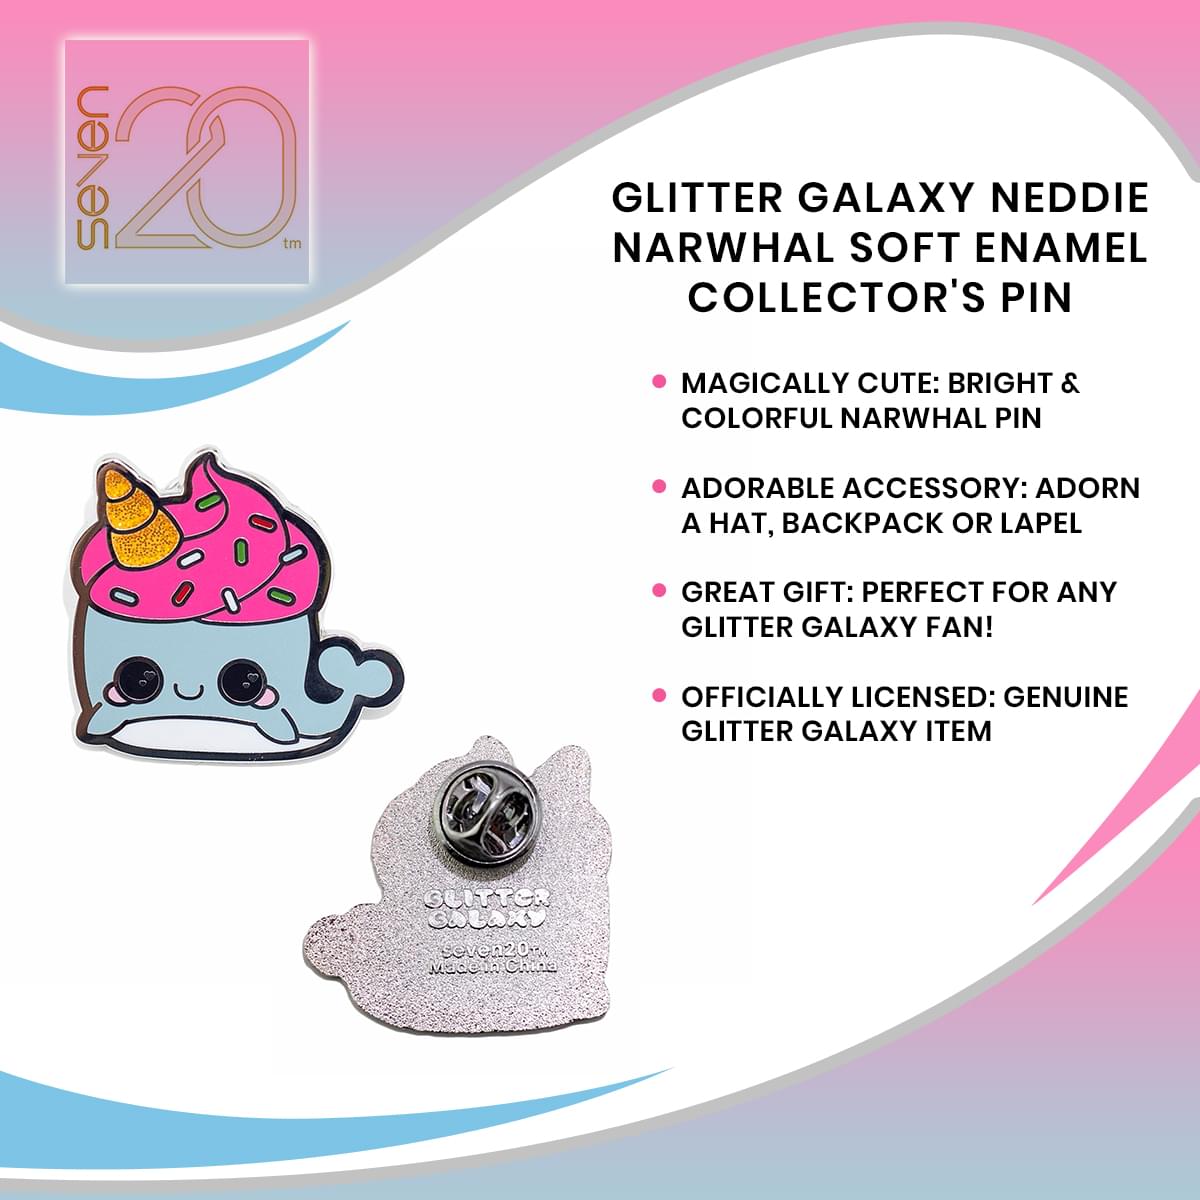 Glitter Galaxy Neddie Narwhal Soft Enamel Collector's Pin